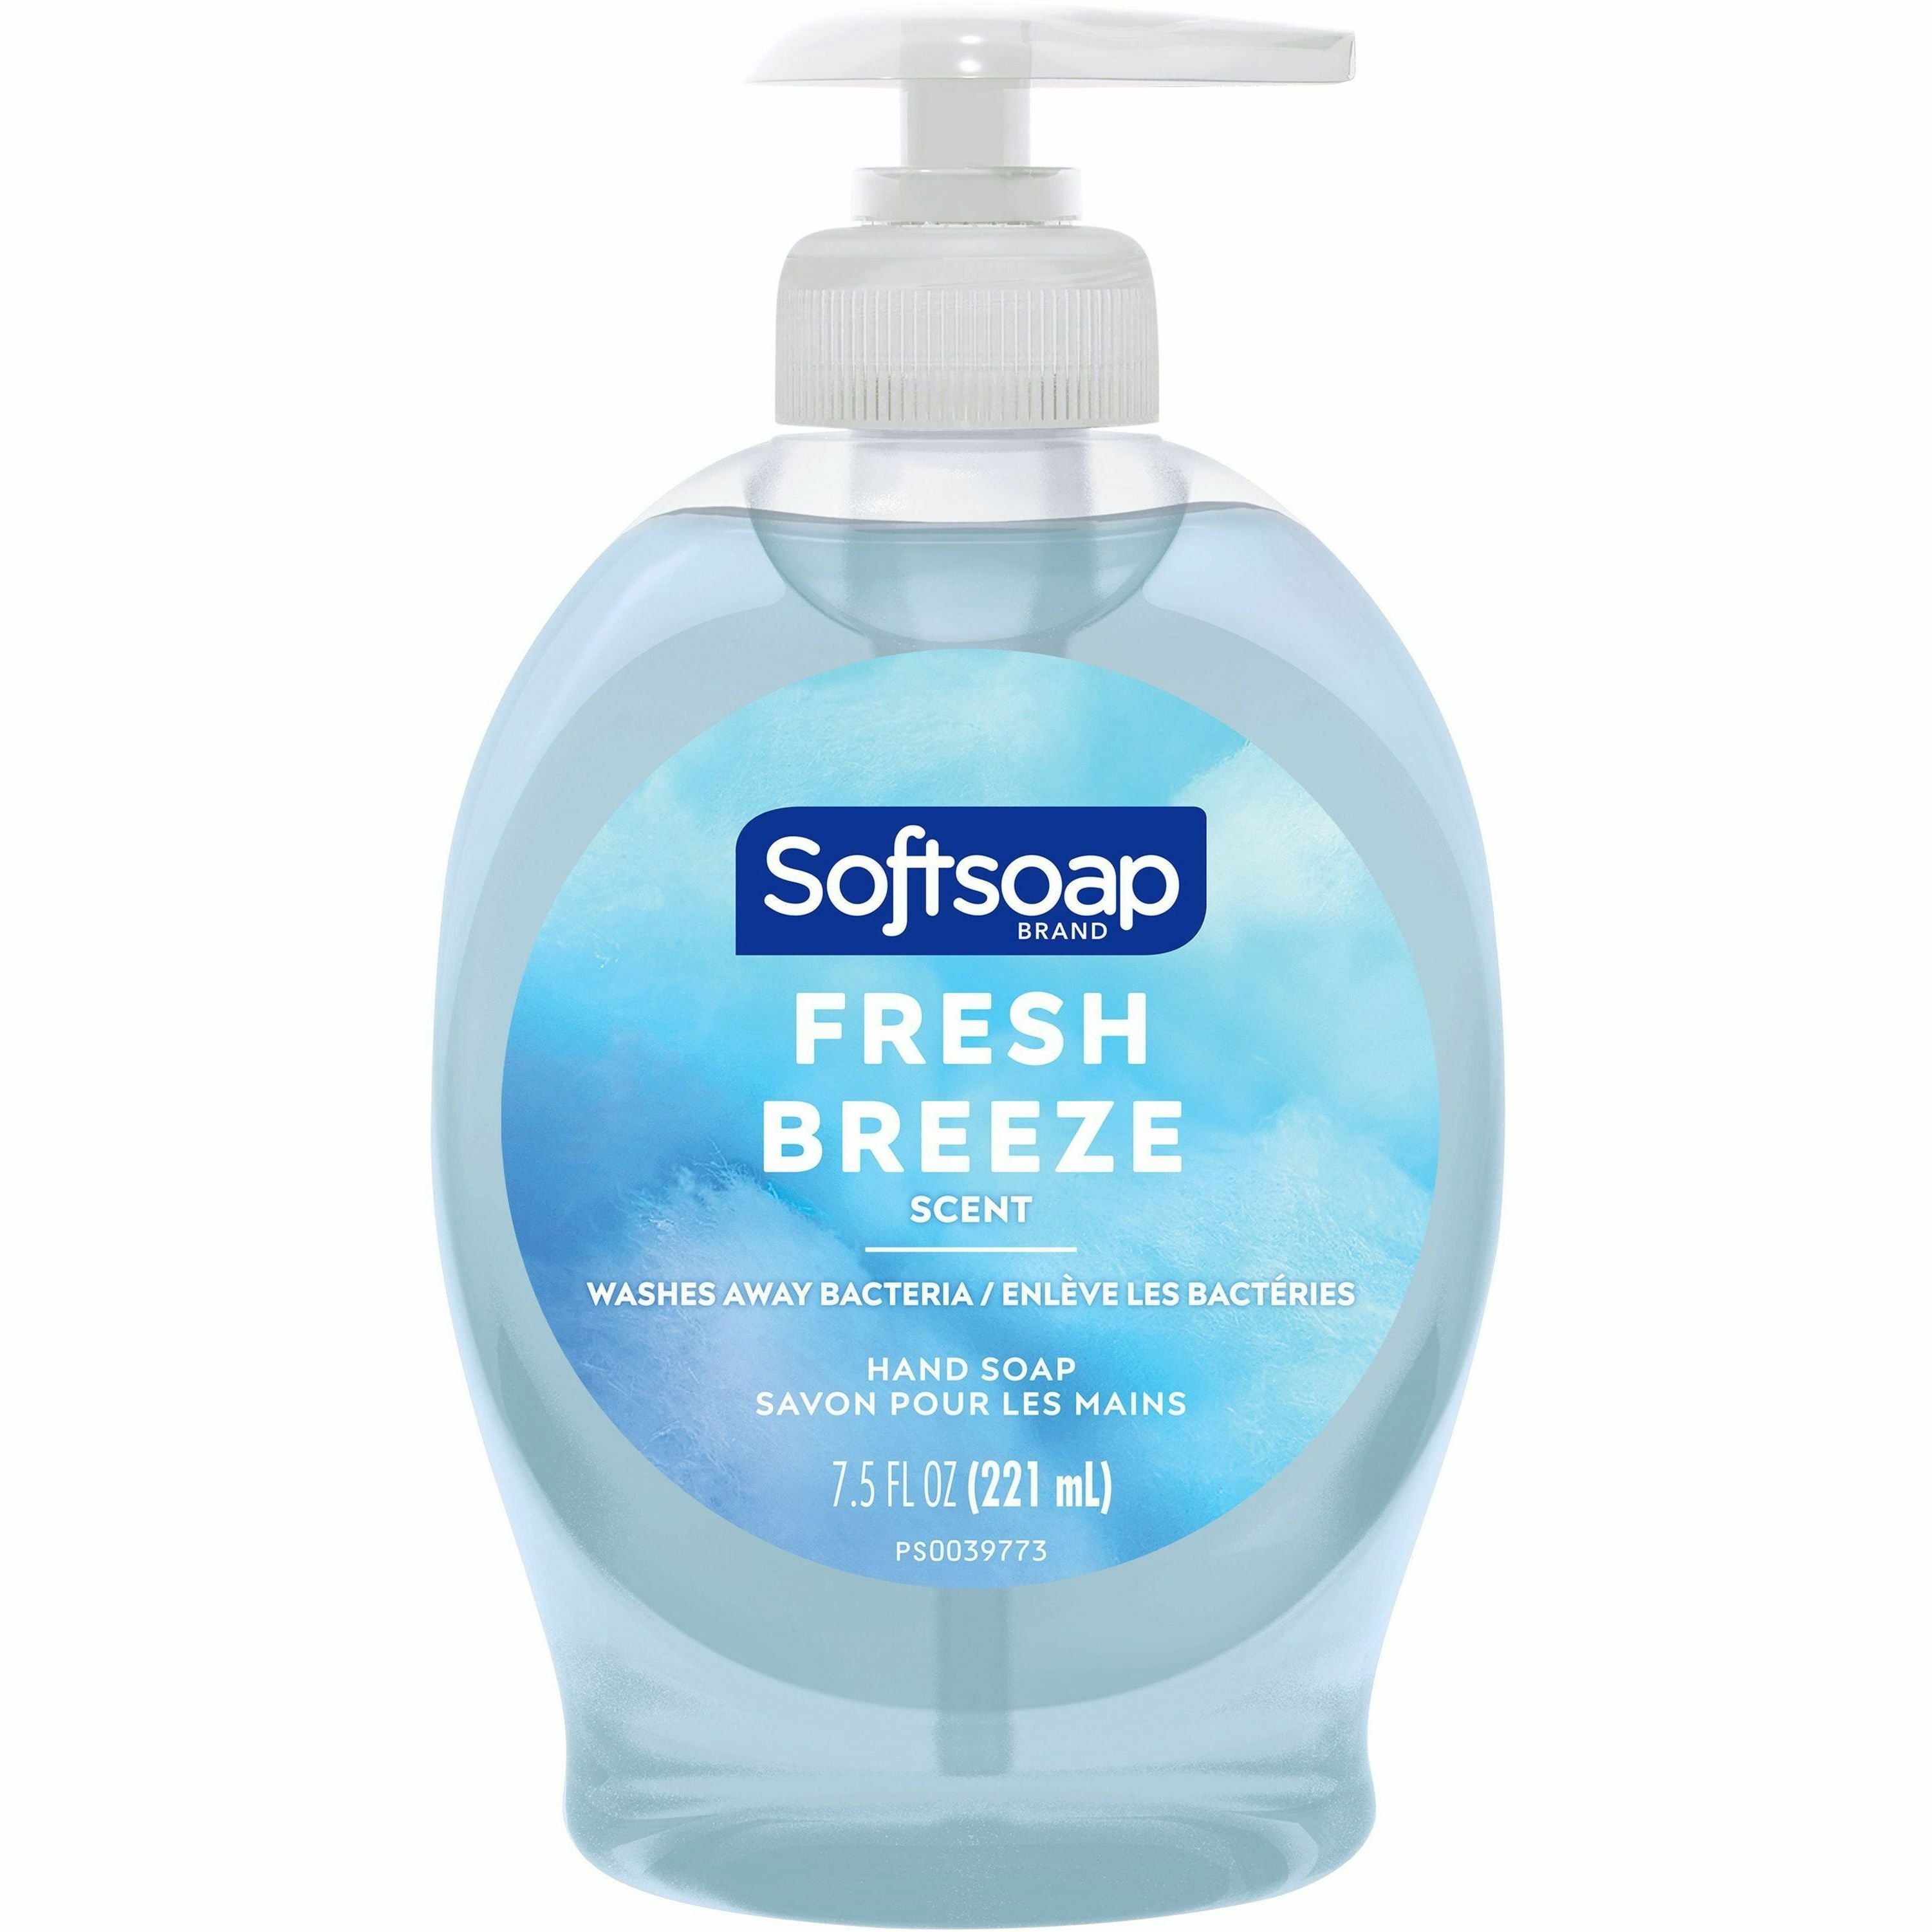 softsoap-fresh-breeze-hand-soap_cpcus04964act - 2